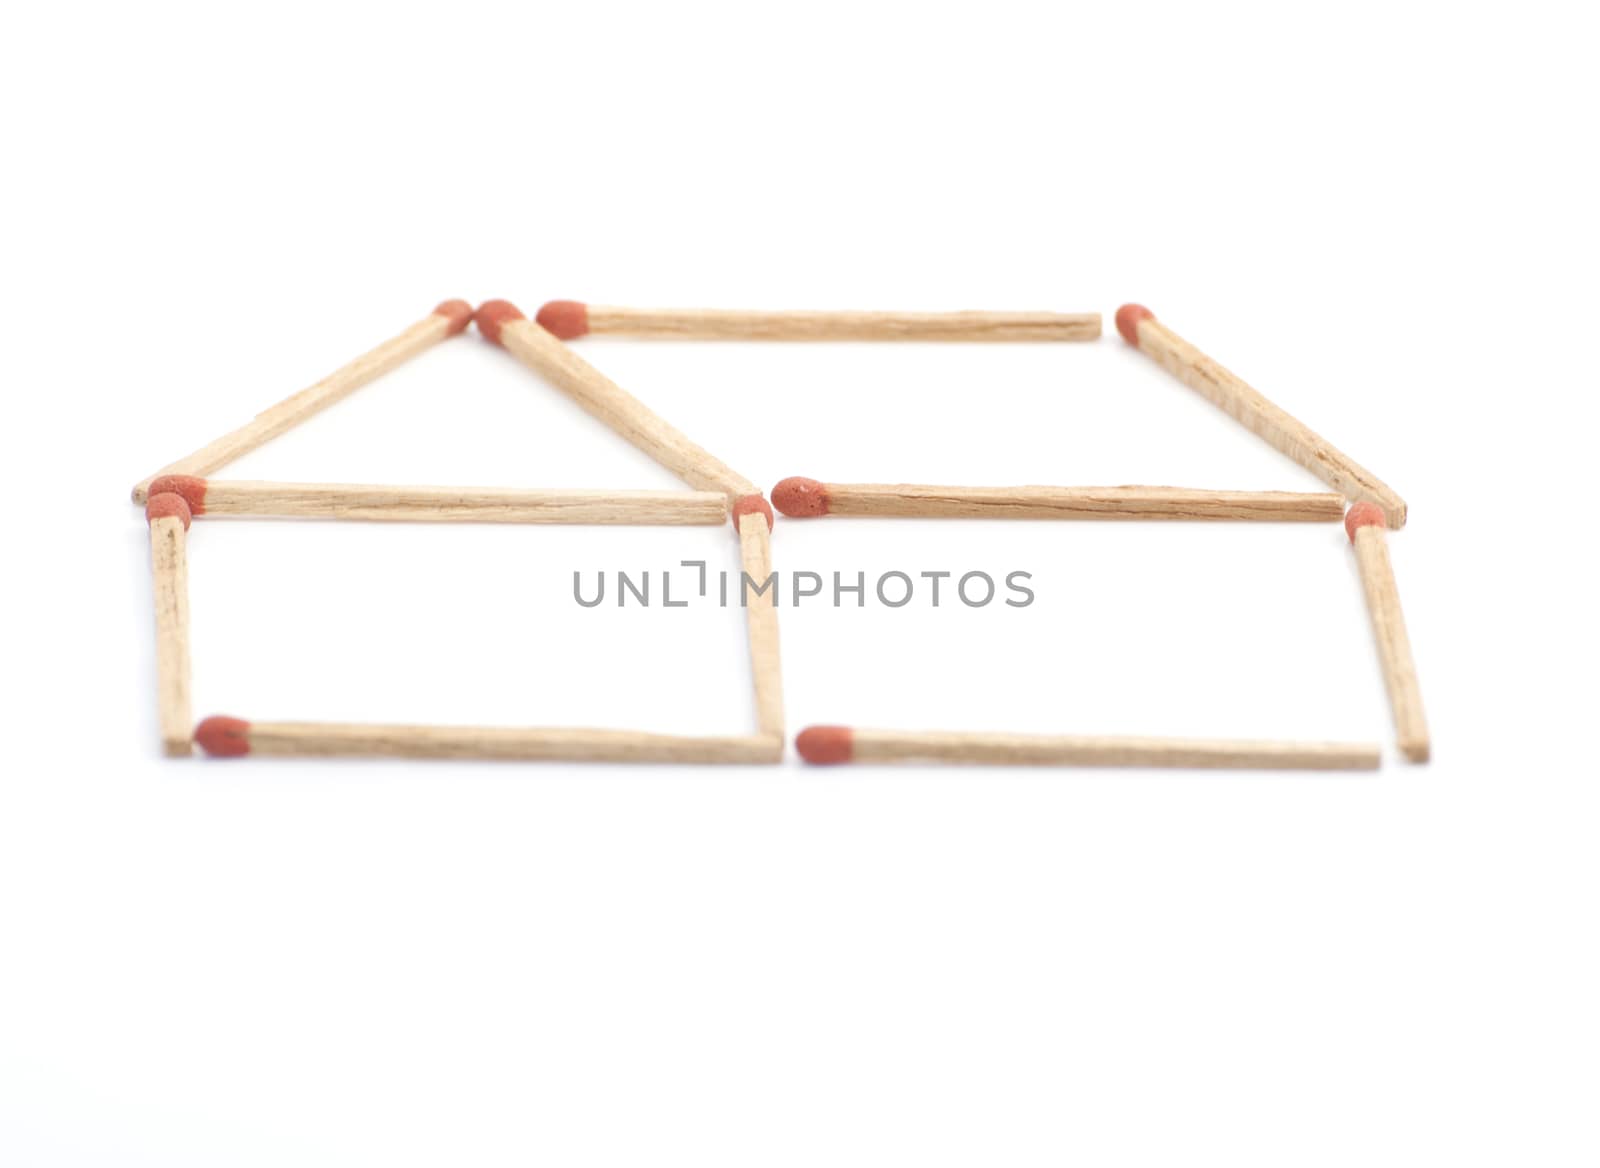 The abstract house made matches, isolated on white background